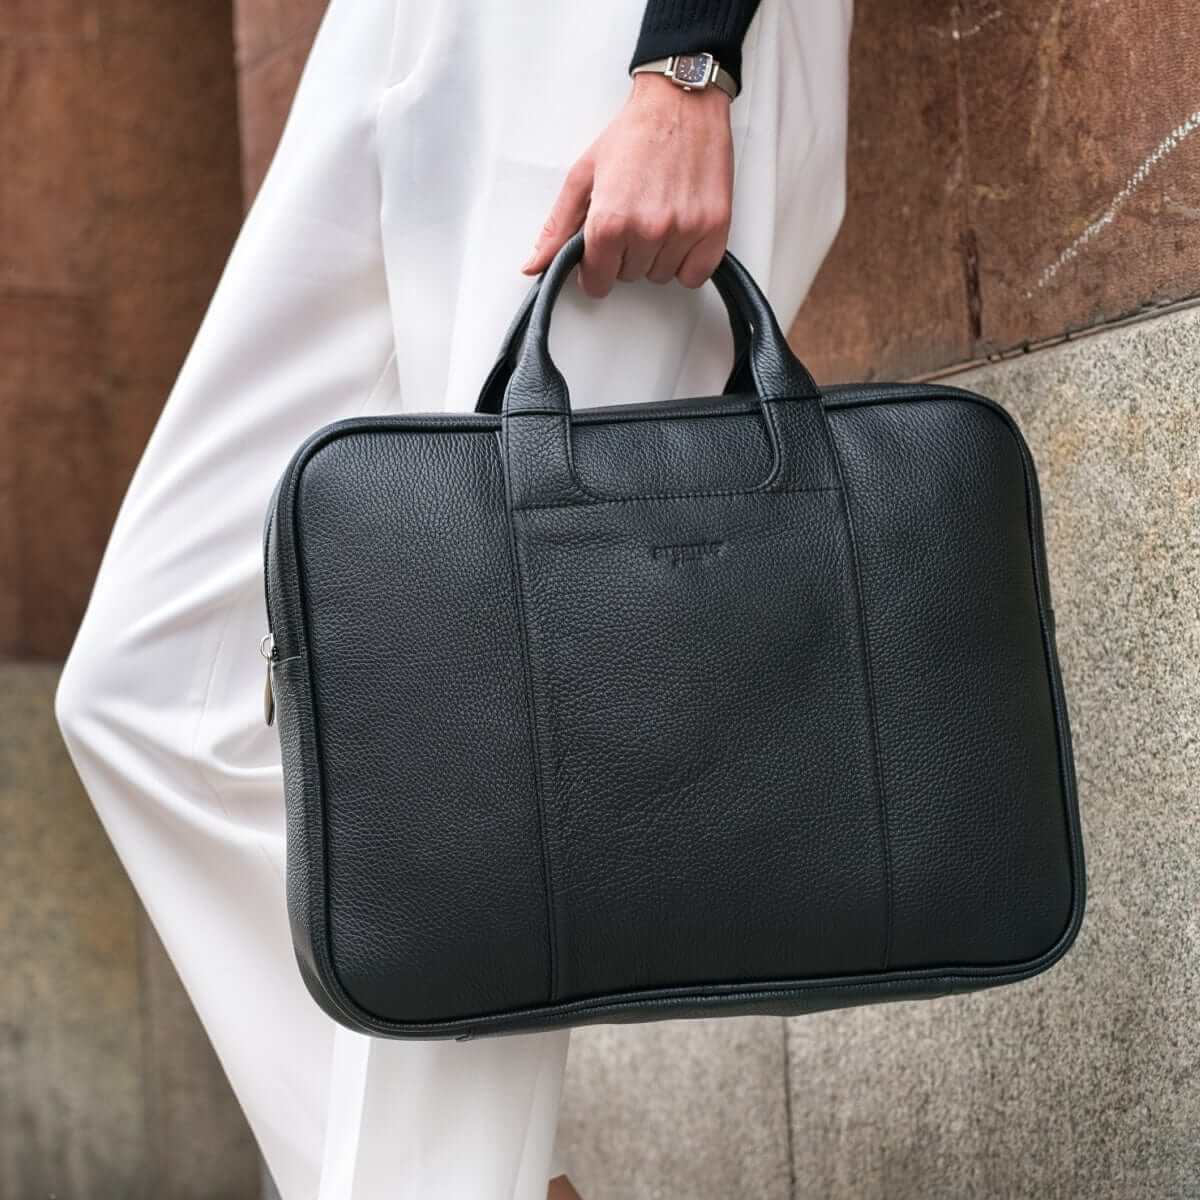 Arsante Classic Leather Briefcase in Rich Black - a luxurious, handcrafted briefcase made from Italian full-grain leather, perfect for professional settings.